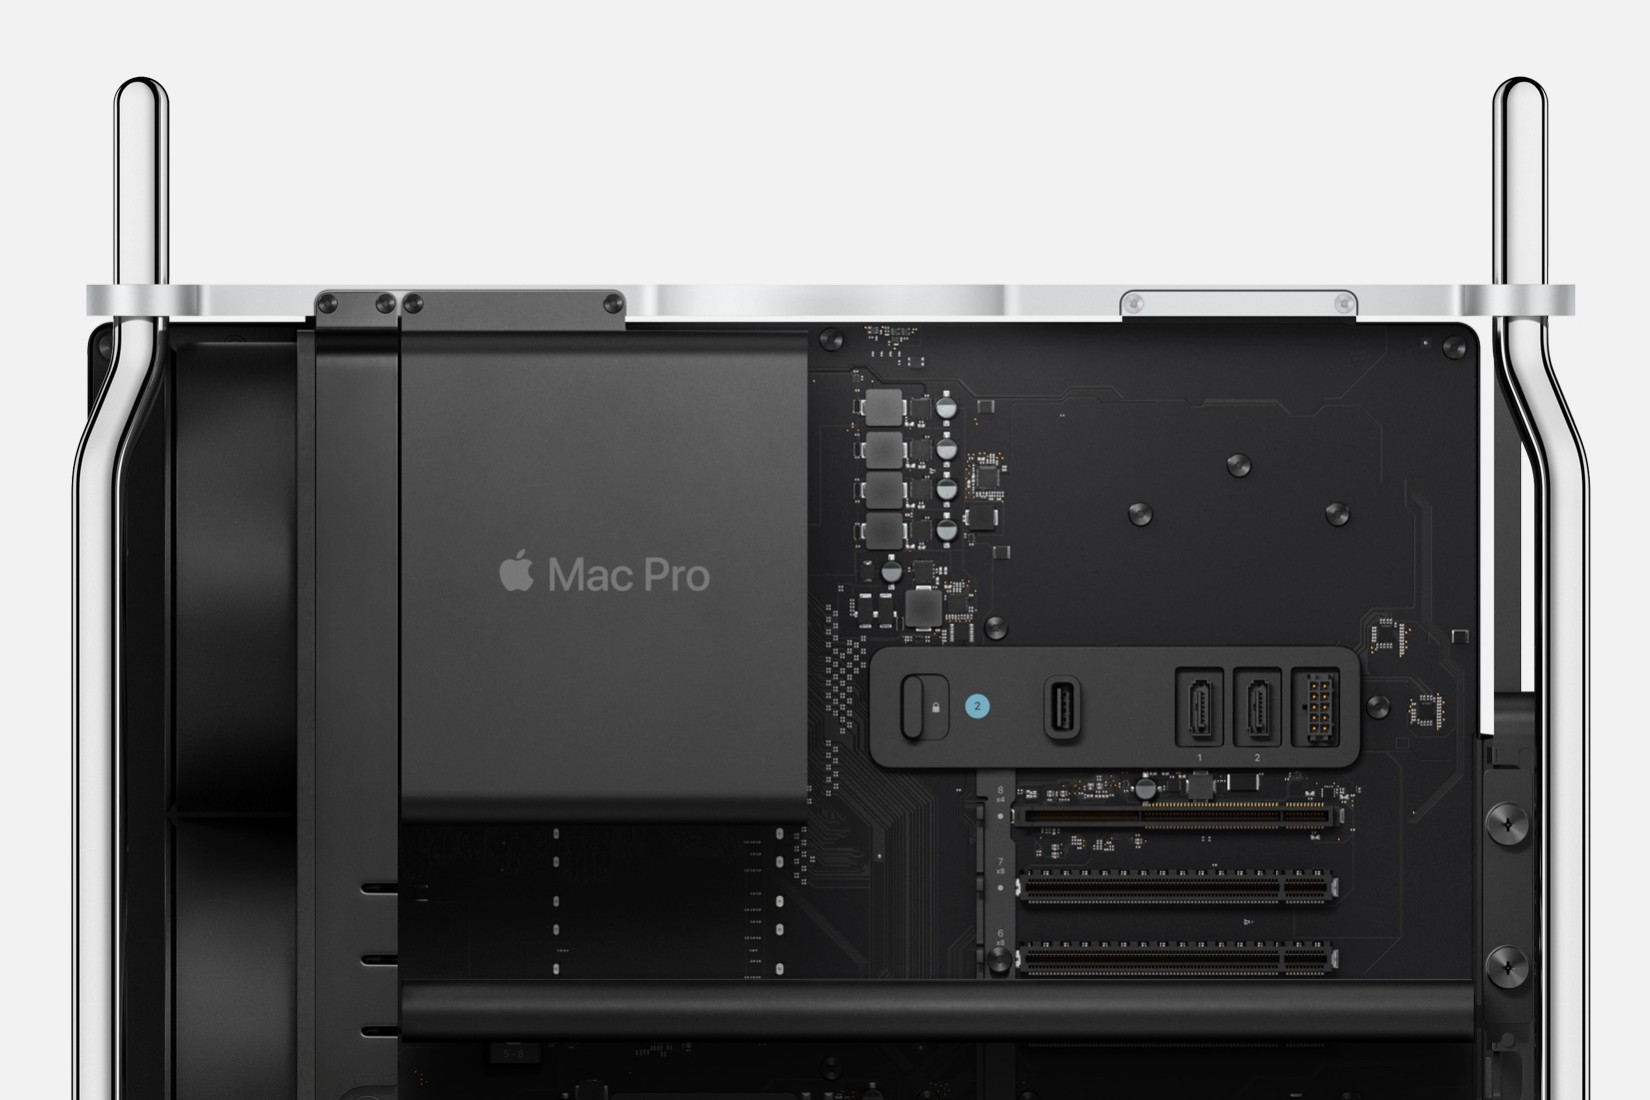 The inside of Apple's Mac Pro, showing its motherboard and some connectivity slots.